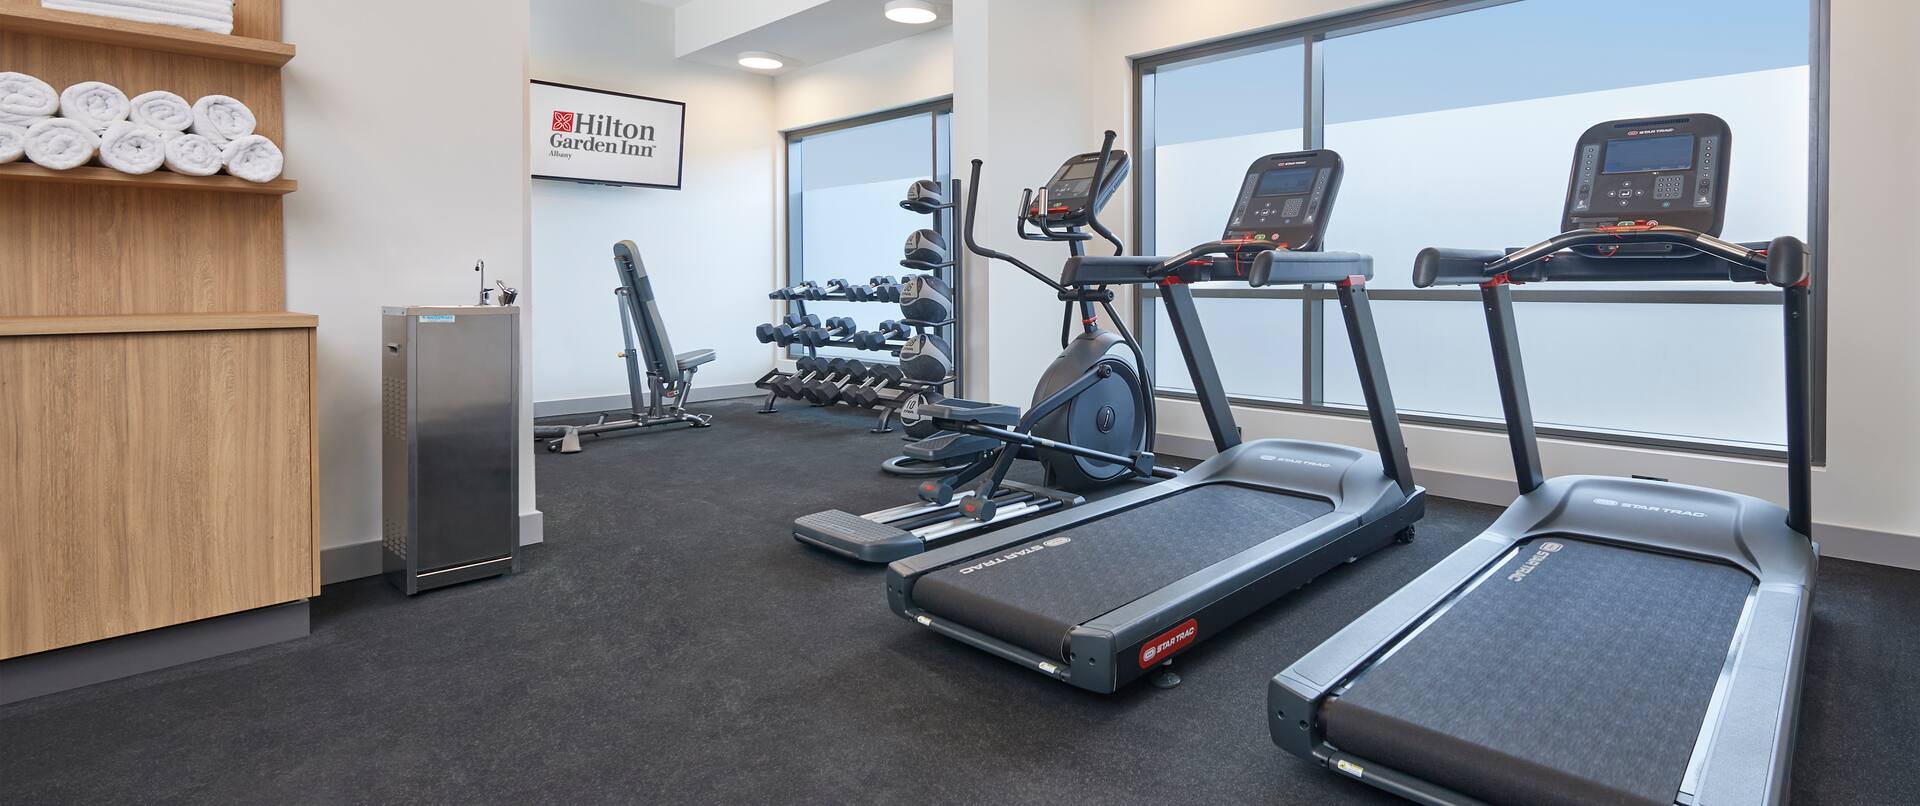 Fitness center cardio machines and free weights